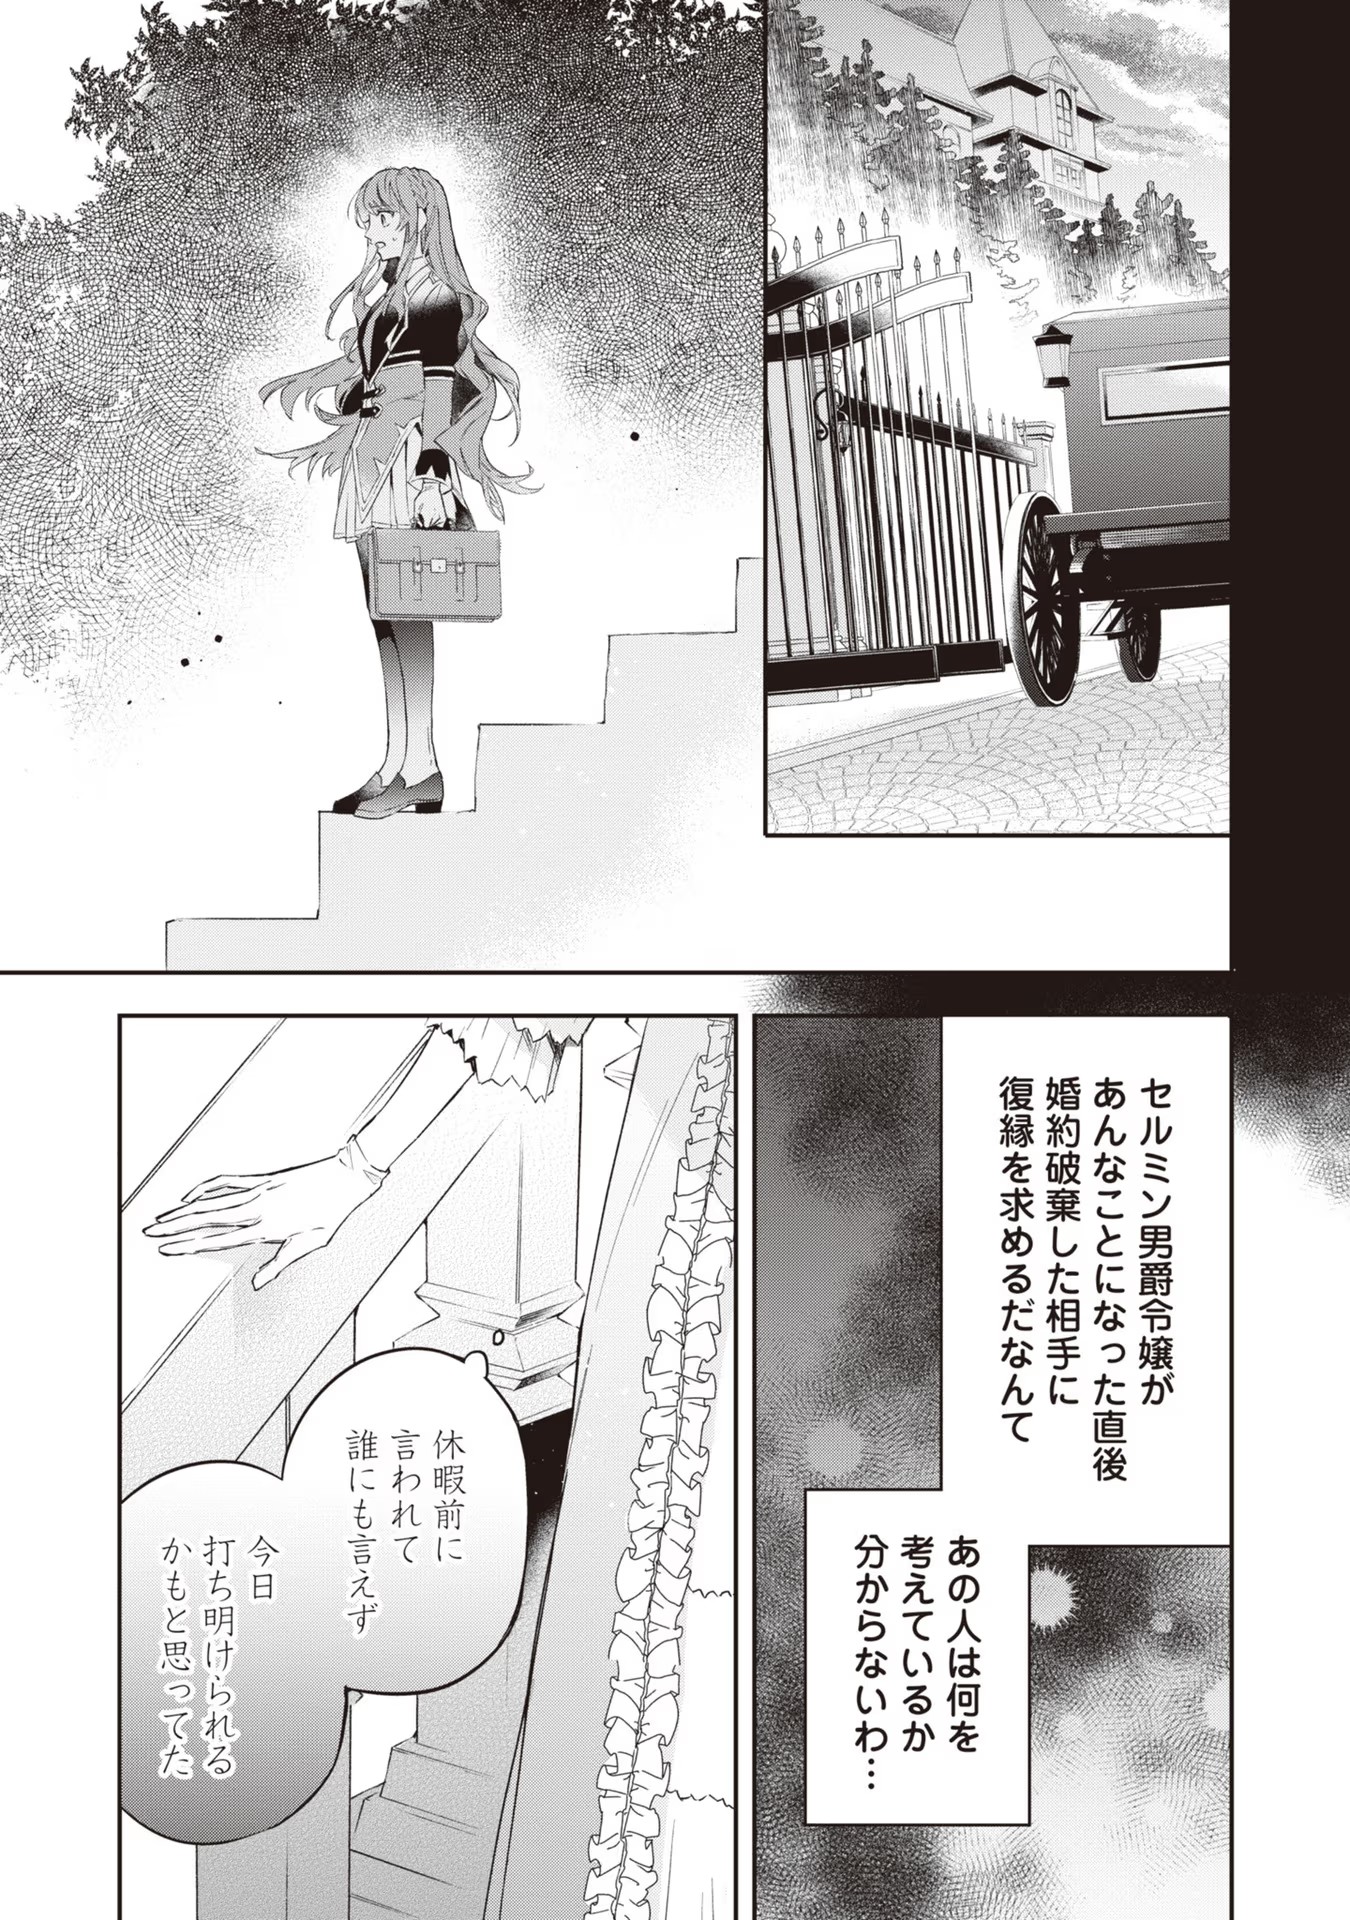 Kyou mo Reisoku to Kisoiatte Iru you desu If the Villainess and the Villain Were to Meet and Fall in Love ~It Seems the Shunned Heroine Who Formed a Contract With an Unnamed Spirit Is Fighting With the Nobleman Yet Again~ If the Villainess and Villain Met 第15話 - Page 25